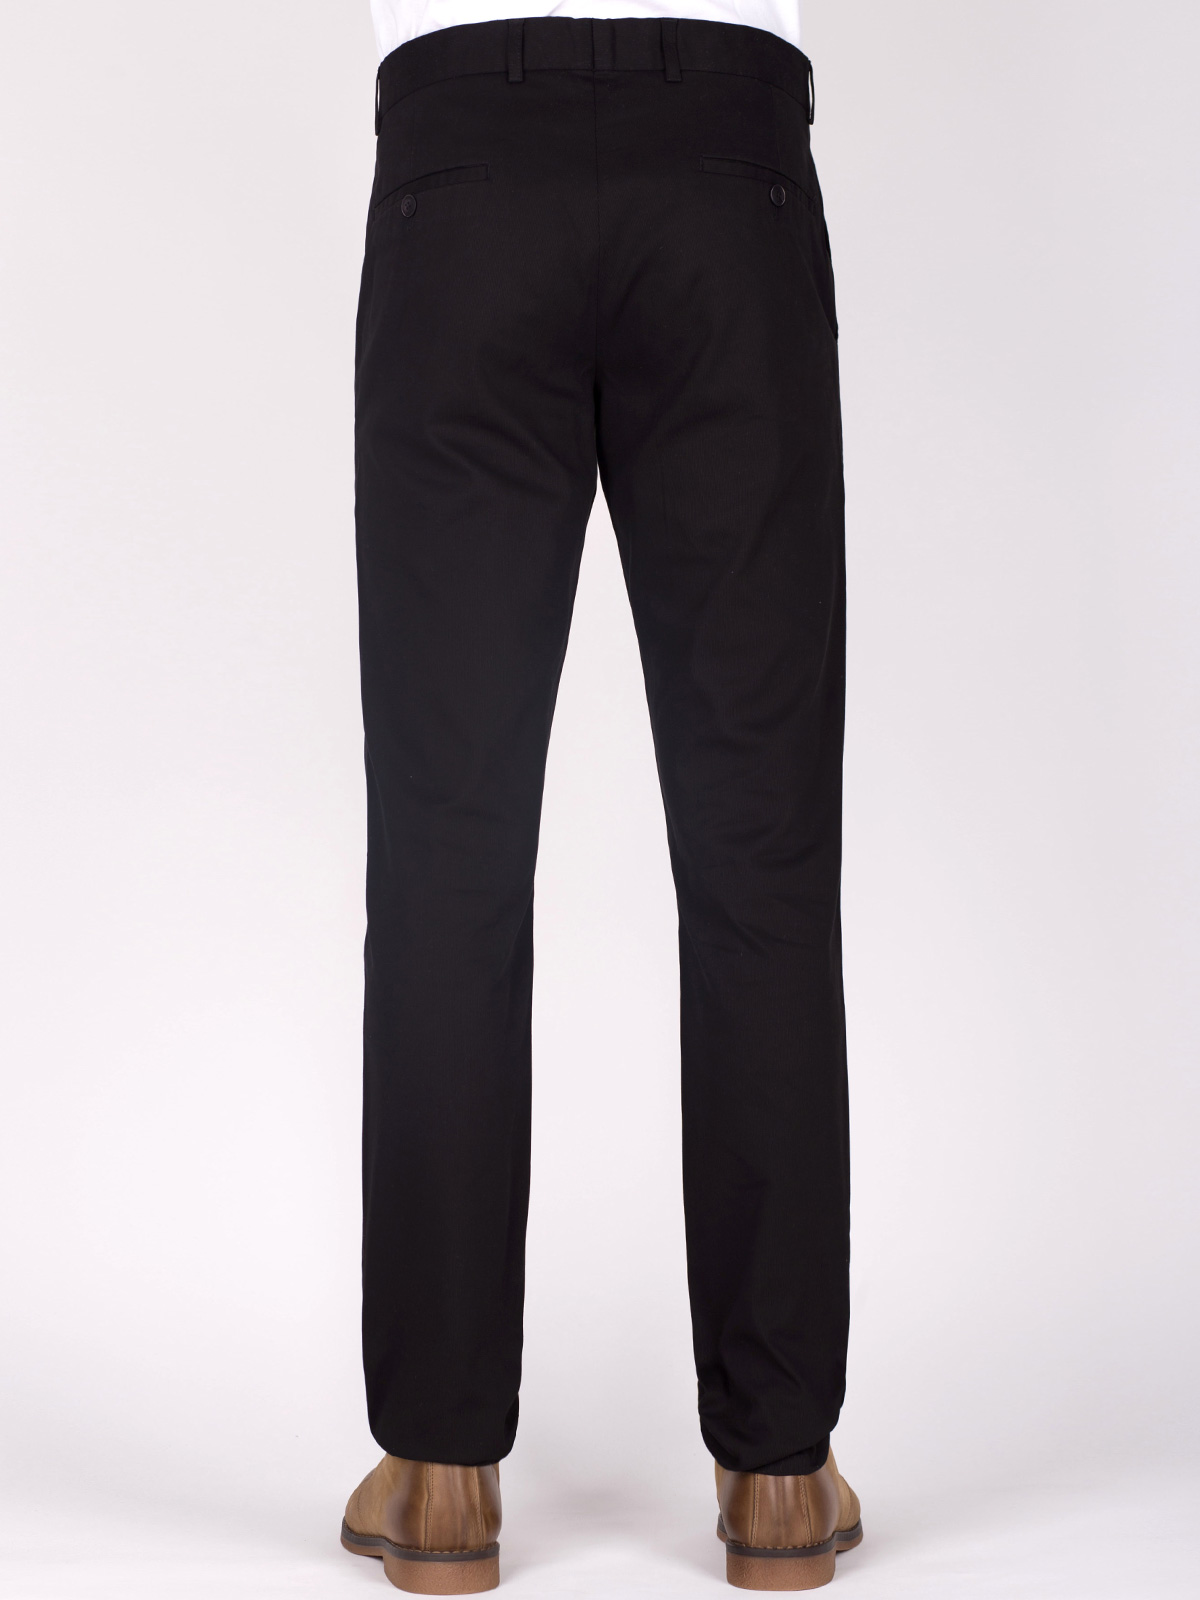 Black fitted cotton pants - 60275 € 14.06 img2